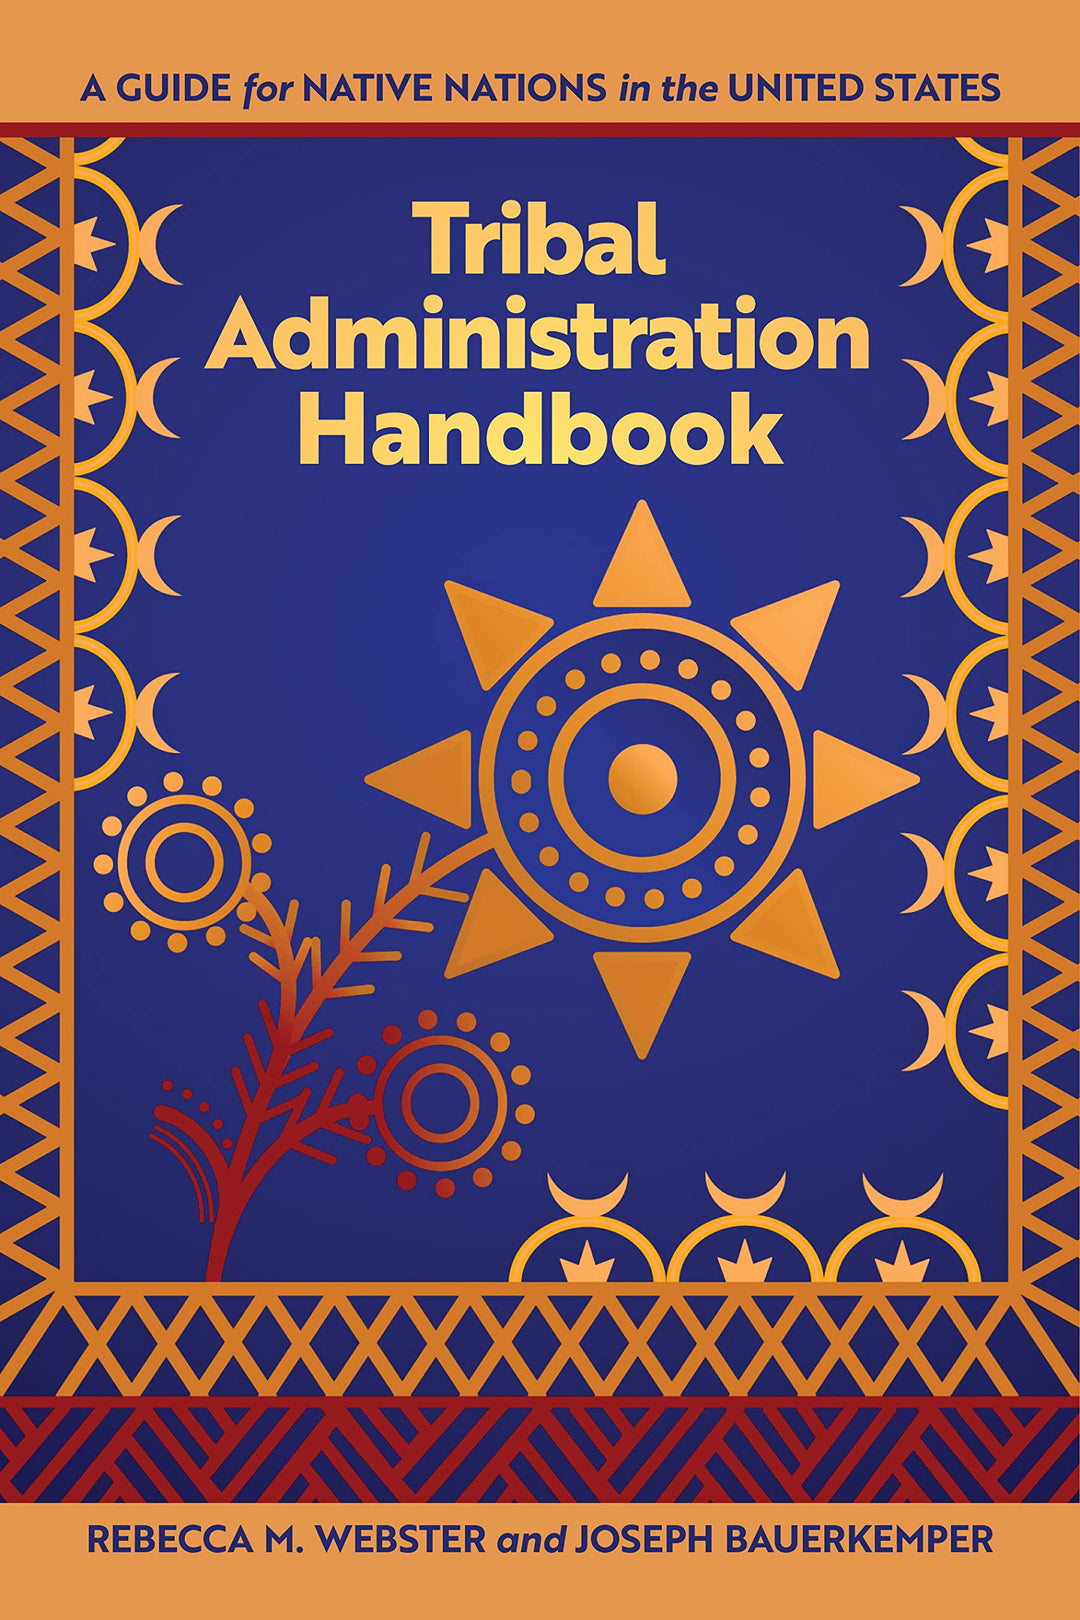 Tribal Administration Handbook: A Guide for Native Nations in the United States edited by Rebecca M. Webster & Joseph Bauerkemper